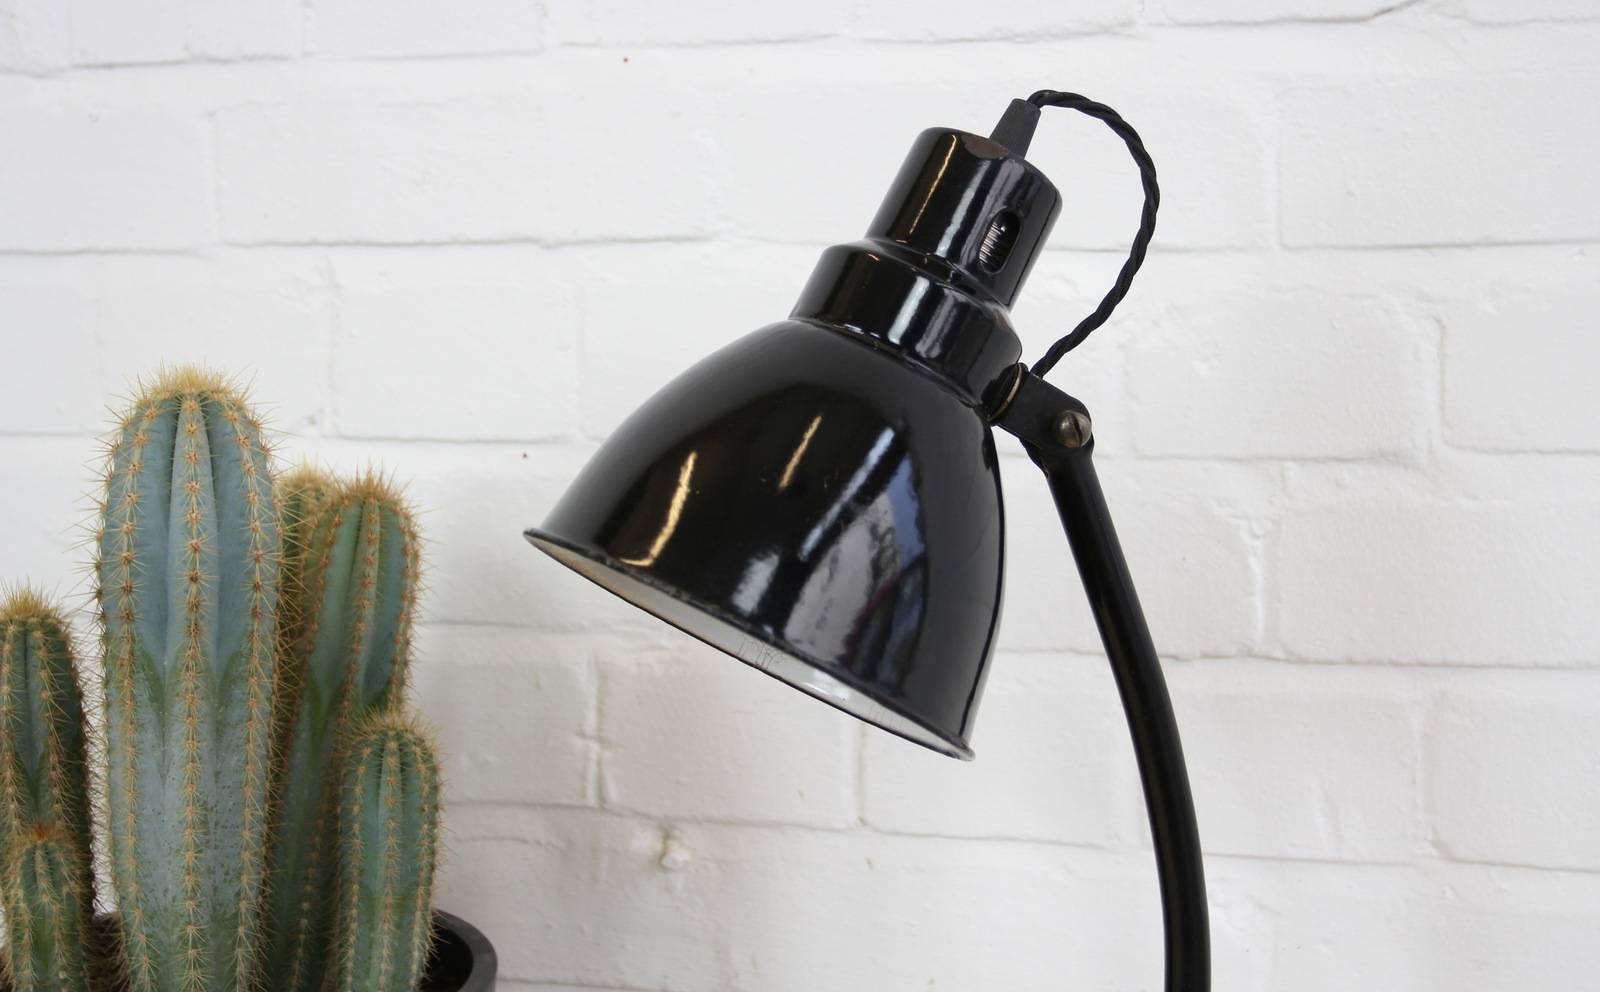 Factory office desk lamp by Gebruder Jacob, circa 1920s

Product code #OA474

- Heavy cast iron base
- Vitreous black enamel stepped shade
- Adjustable shade and arm
- Takes E27 fitting bulbs
- Made by Gebruder Jacob GmBh
- German, circa